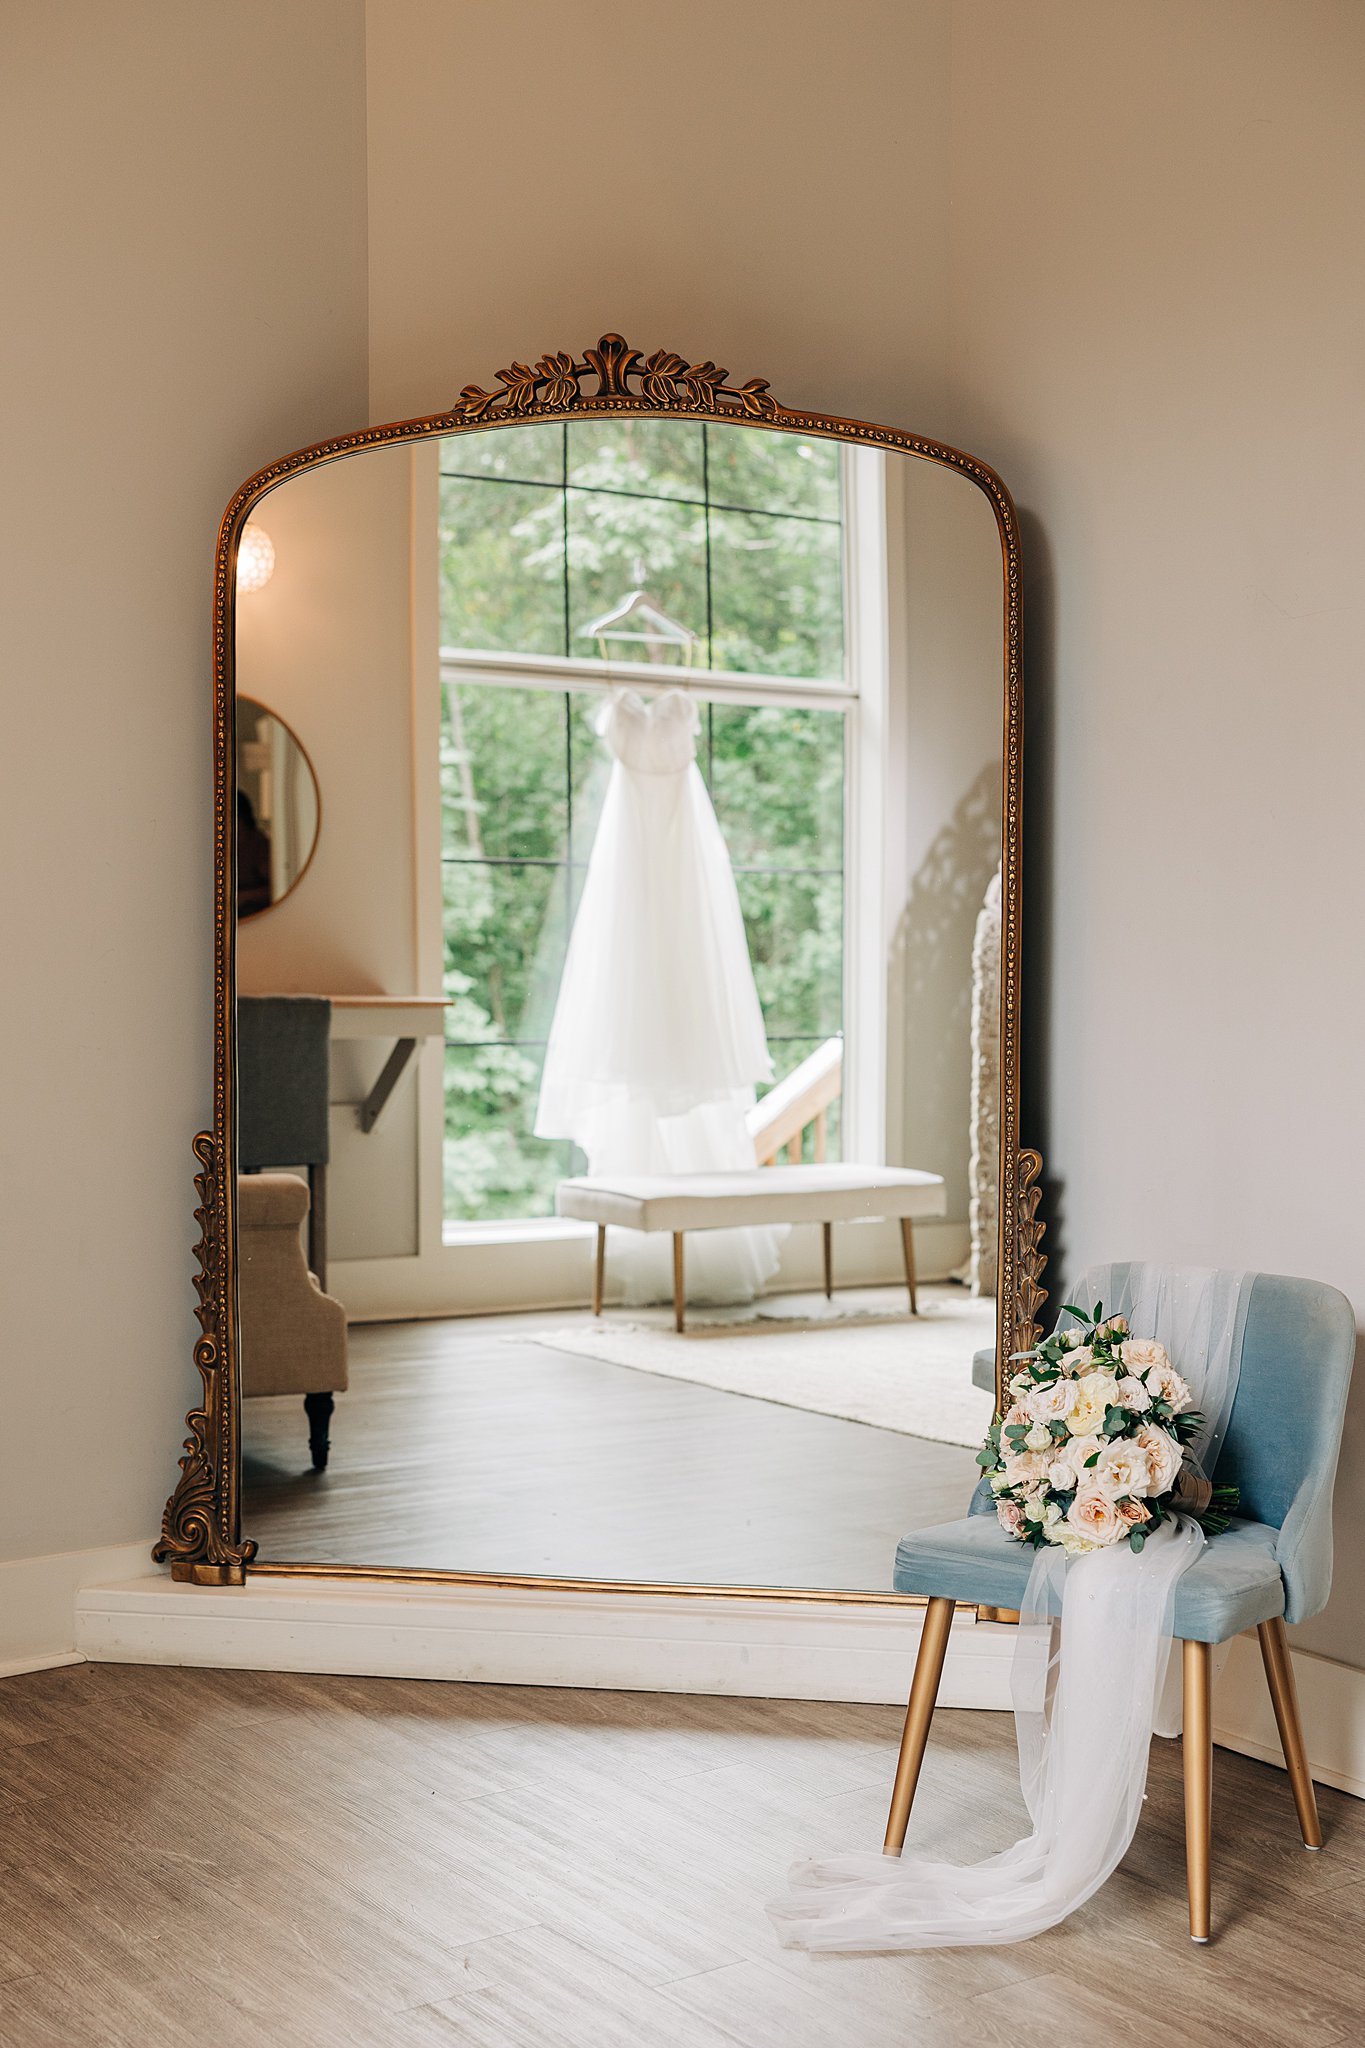 A brides dress hangs in a window in a mirror with a chair holding the veil and bouquet